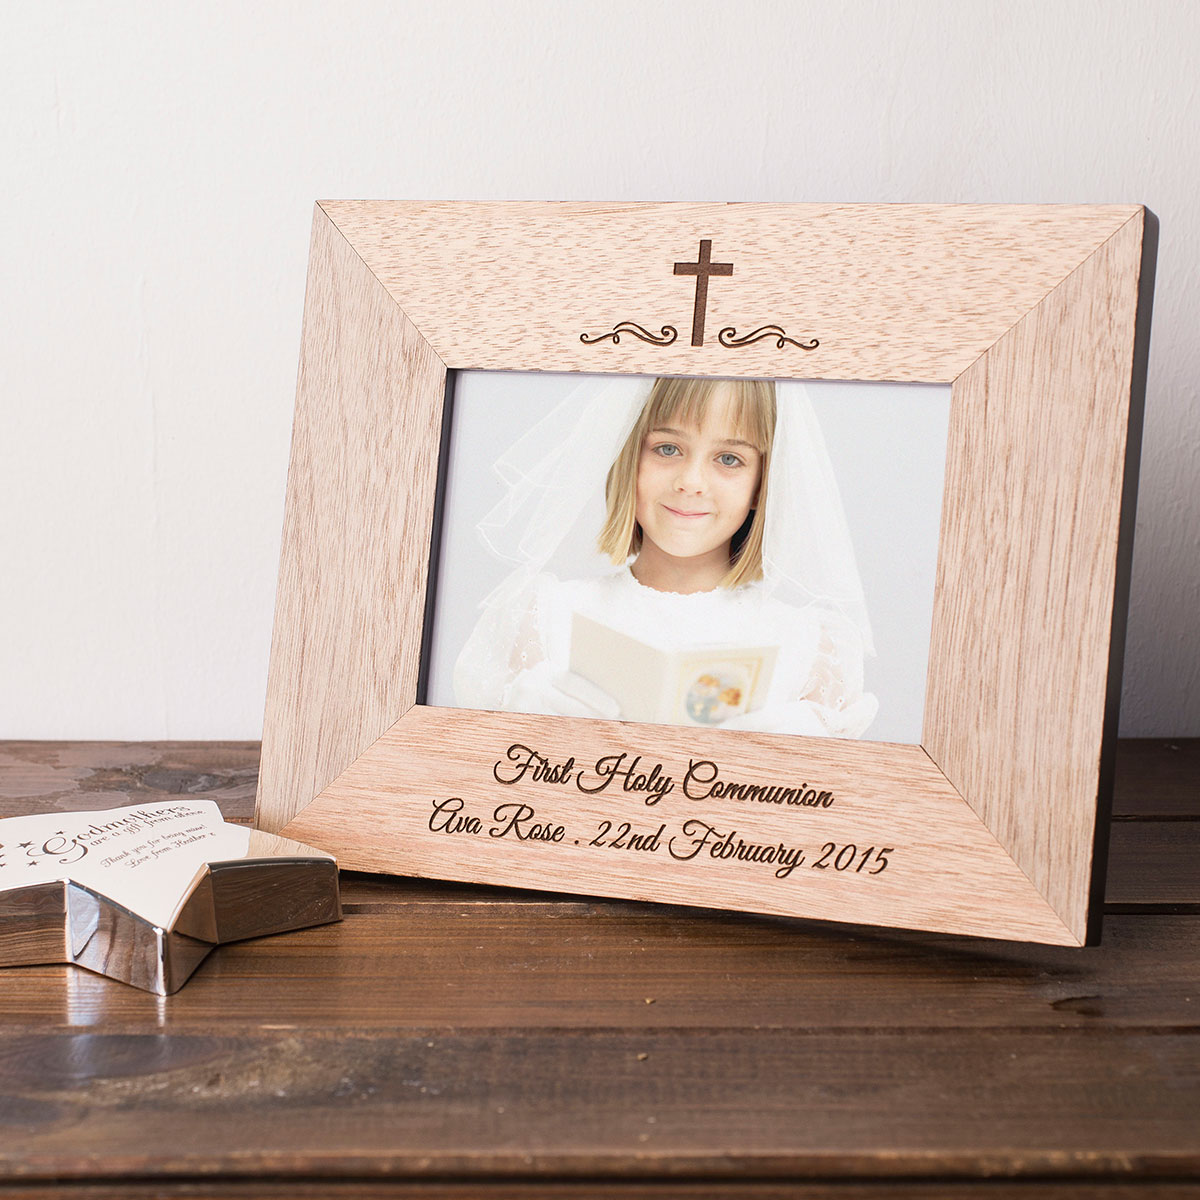 Personalised Engraved Wooden Photo Frame - Holy Communion